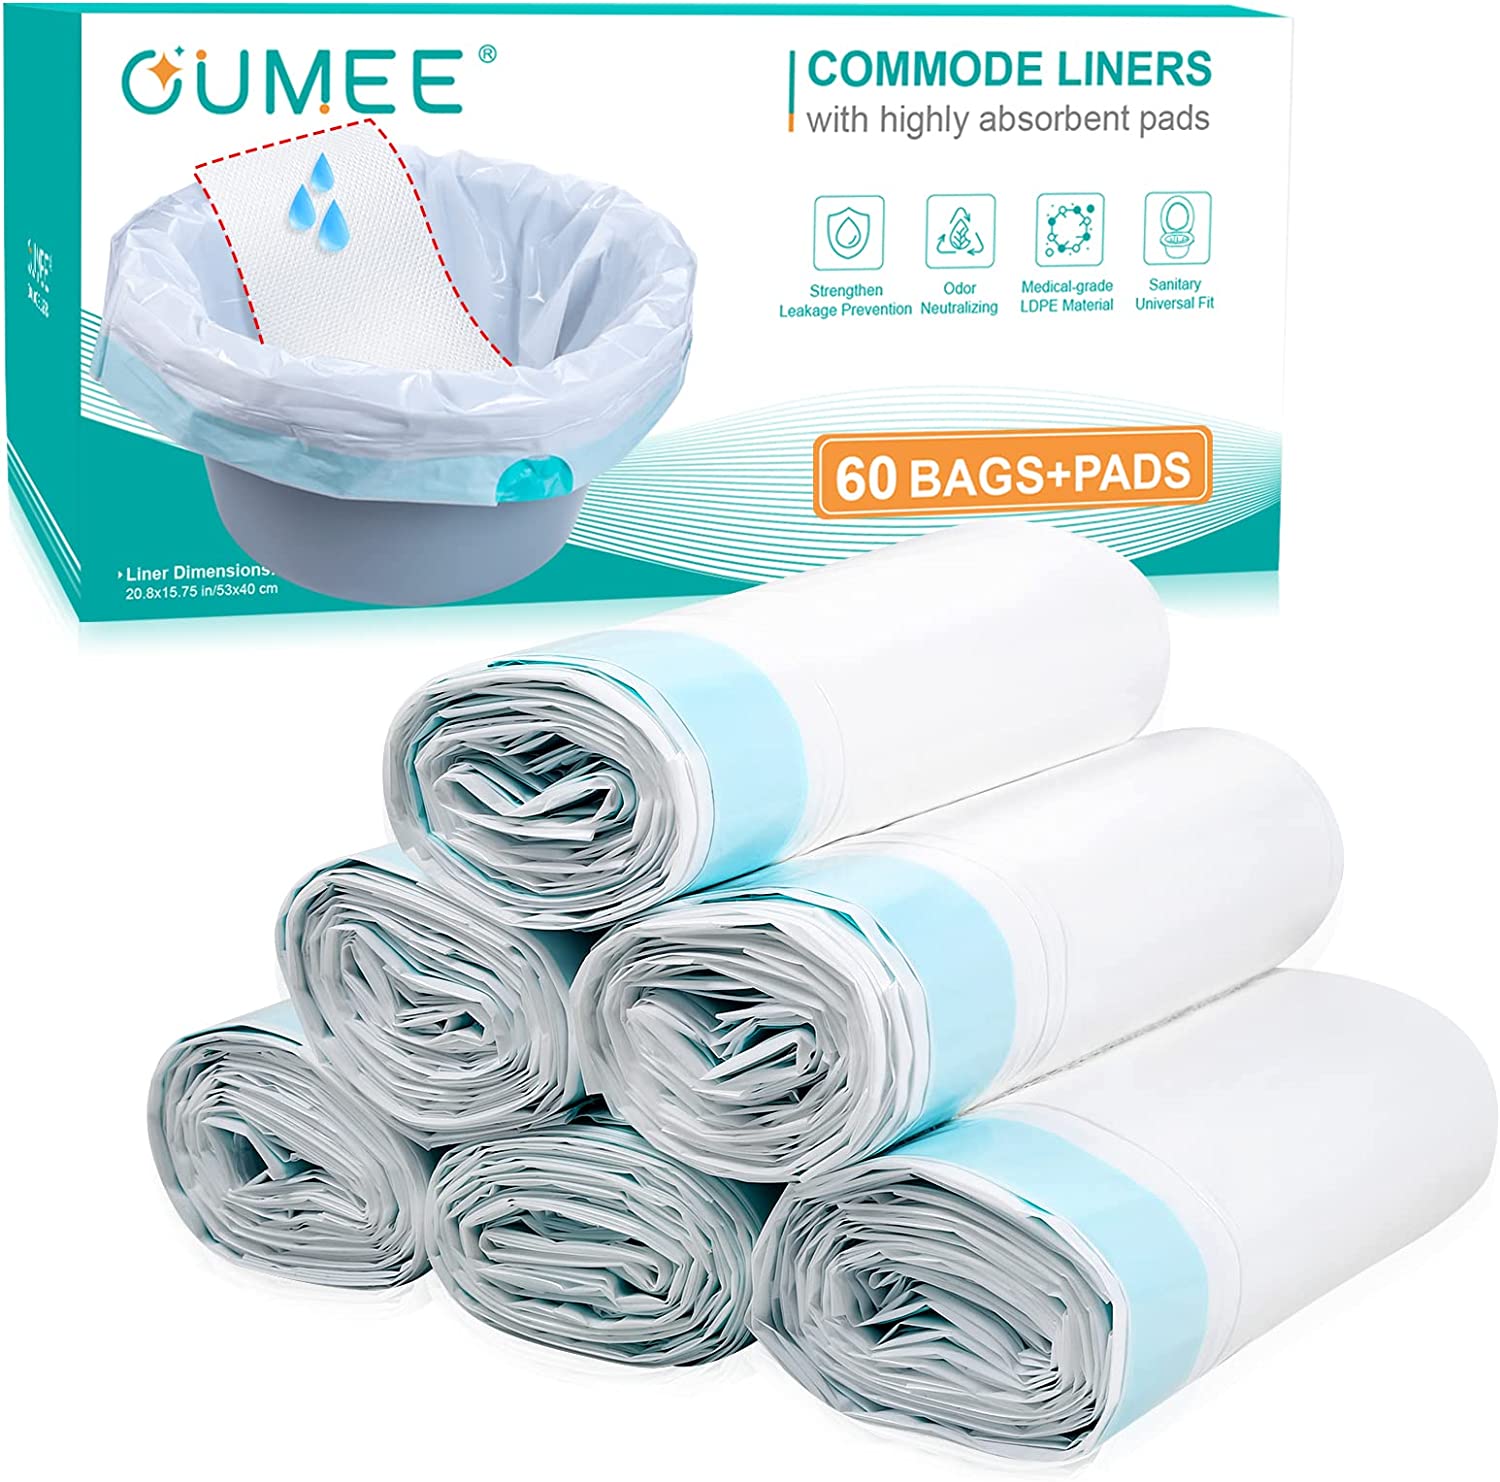 Lunderg Commode Liners - Value Pack 100 Count Universal Fit - Medical Grade Bedside Commode Liners Disposable for Adult Commode Chair Portable